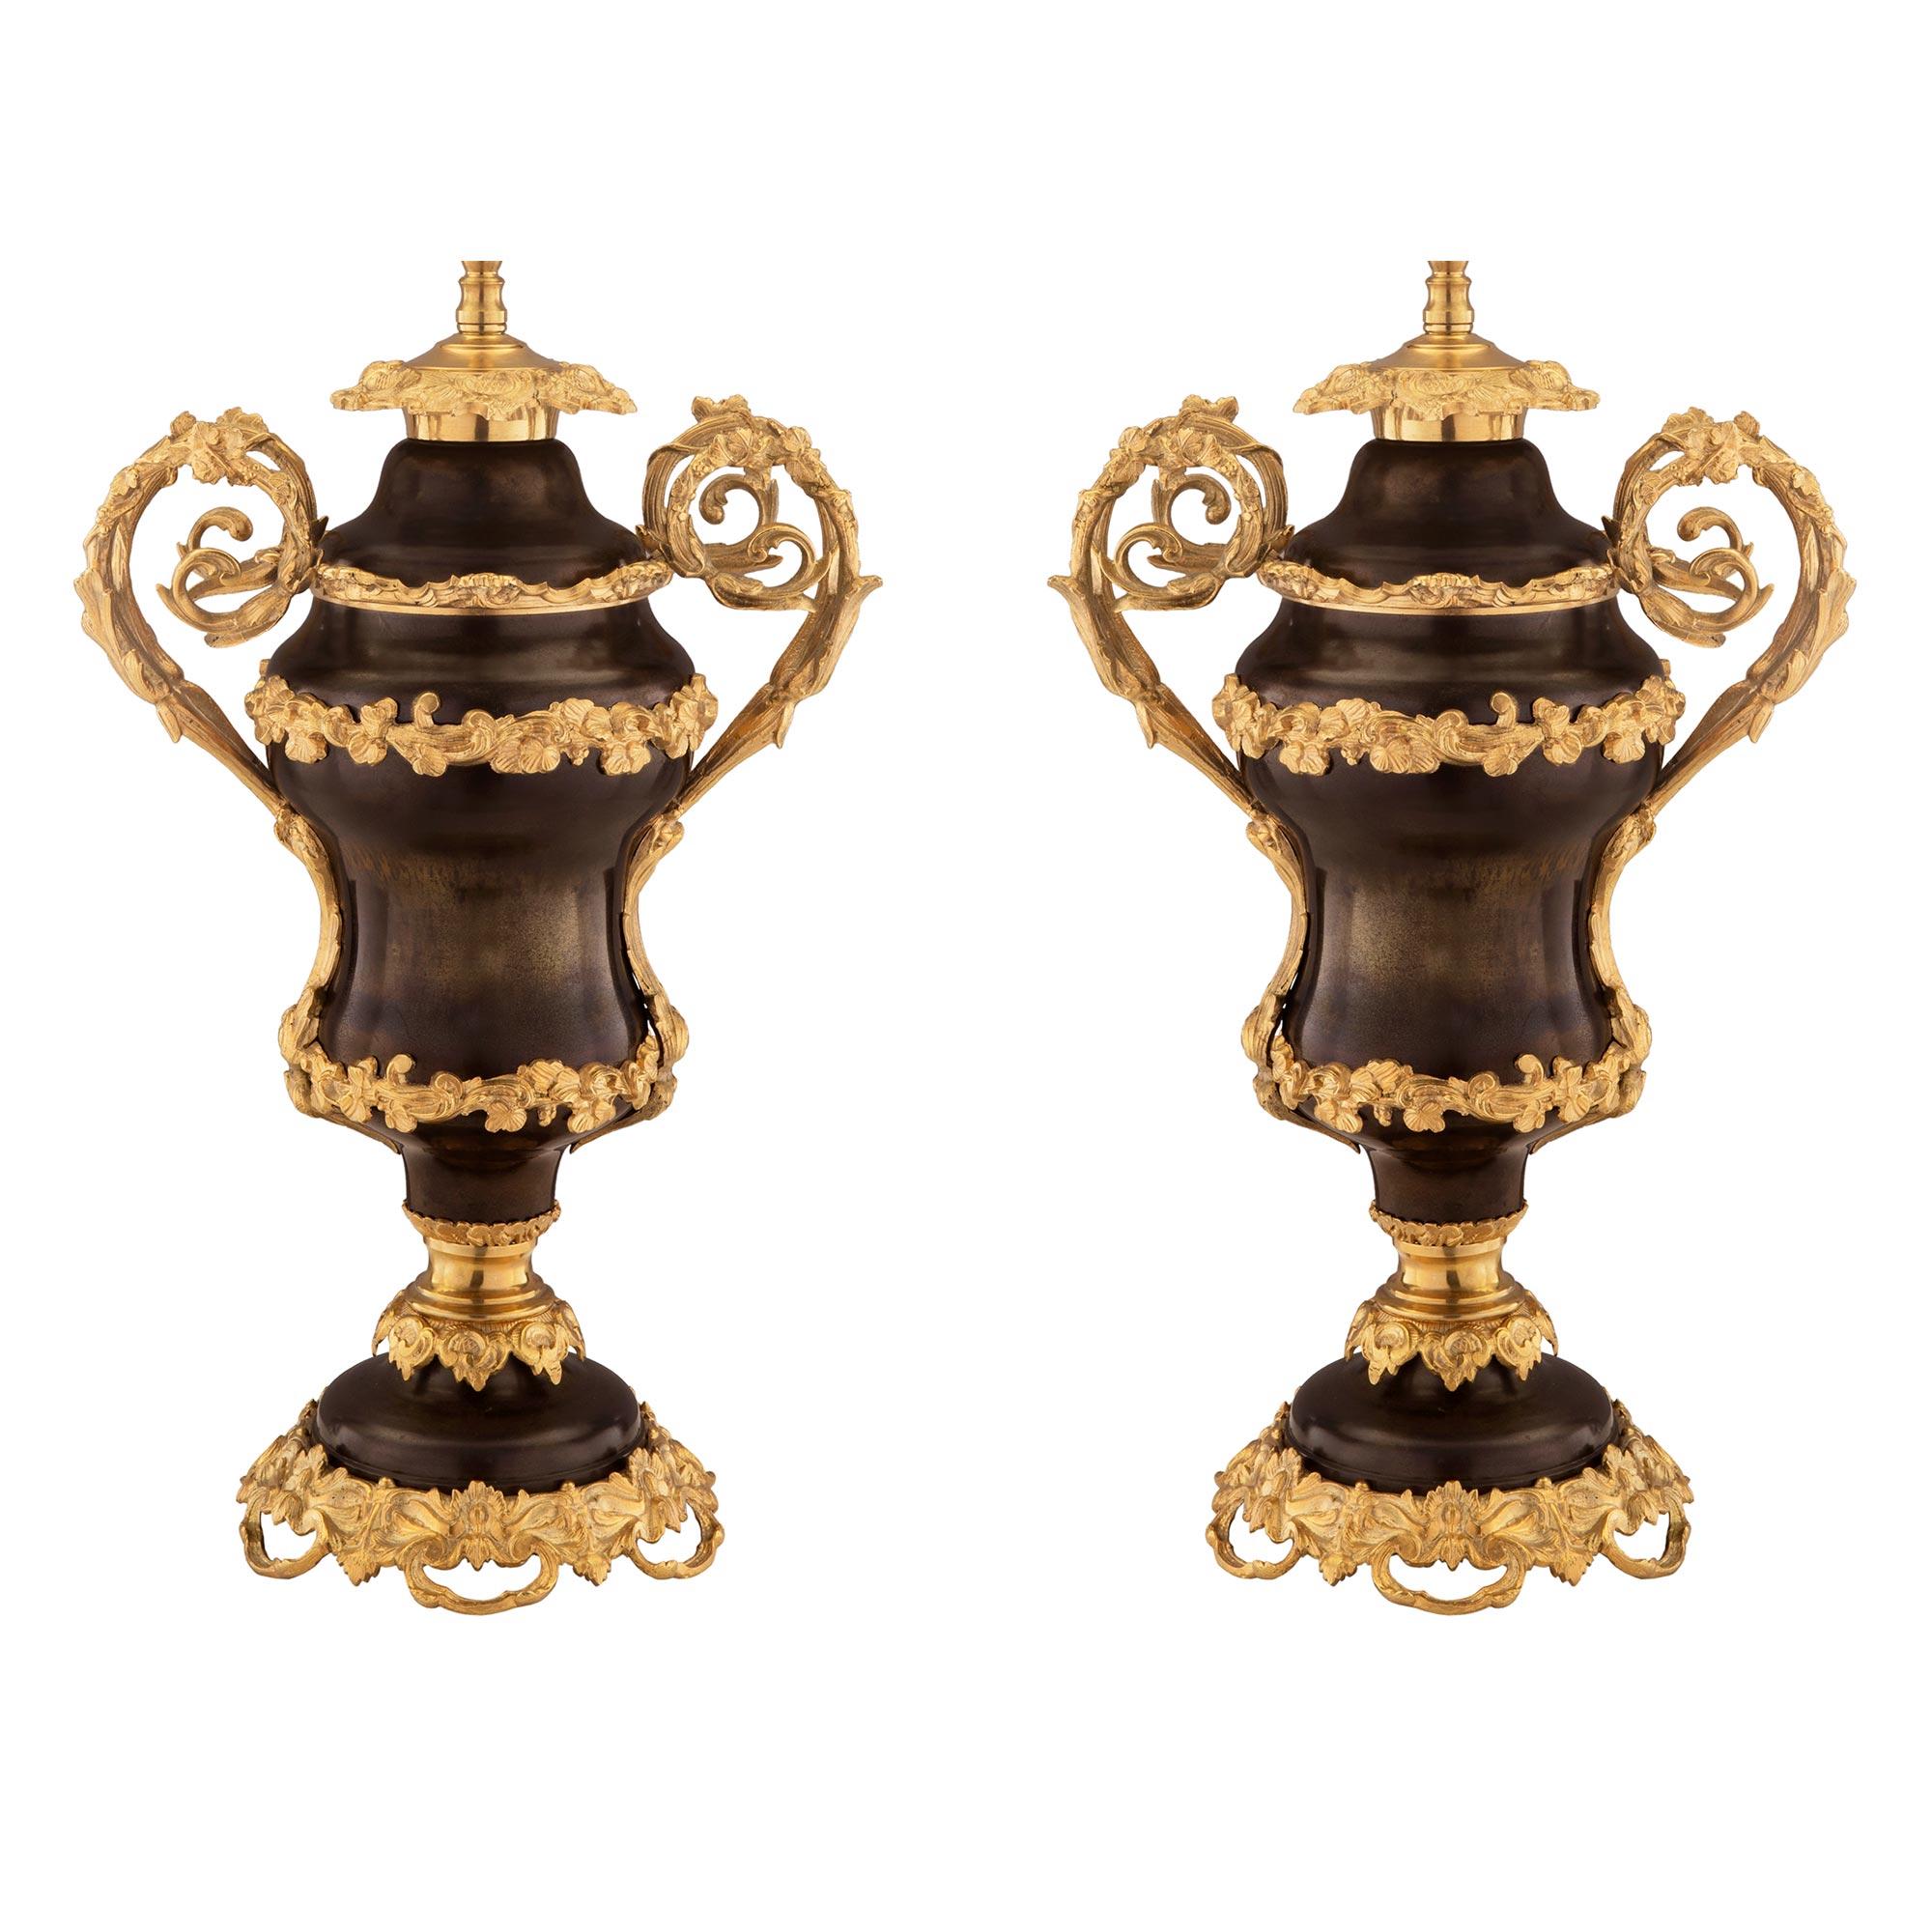 A beautiful and large scale pair of French 19th century Louis XV style patinated bronze and ormolu lamps. Each lamp is raised by lovely ormolu pieced foliated and floral movements below patinated bronze socle pedestals. The elegantly shaped bodies